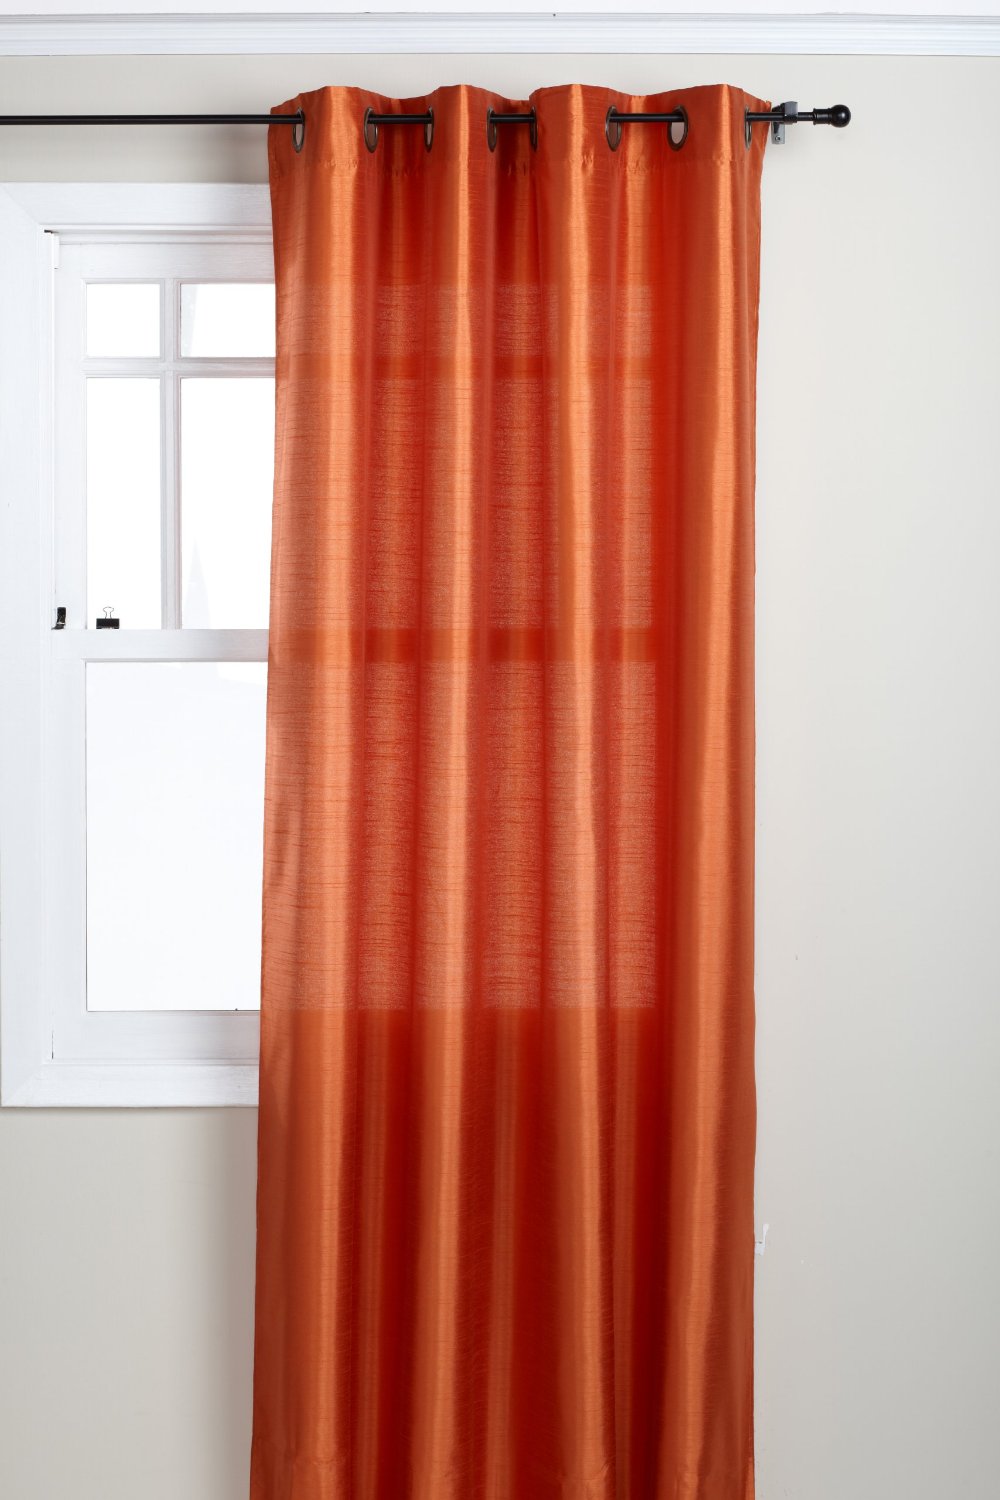 Target Curtains And Drapes in Curtain